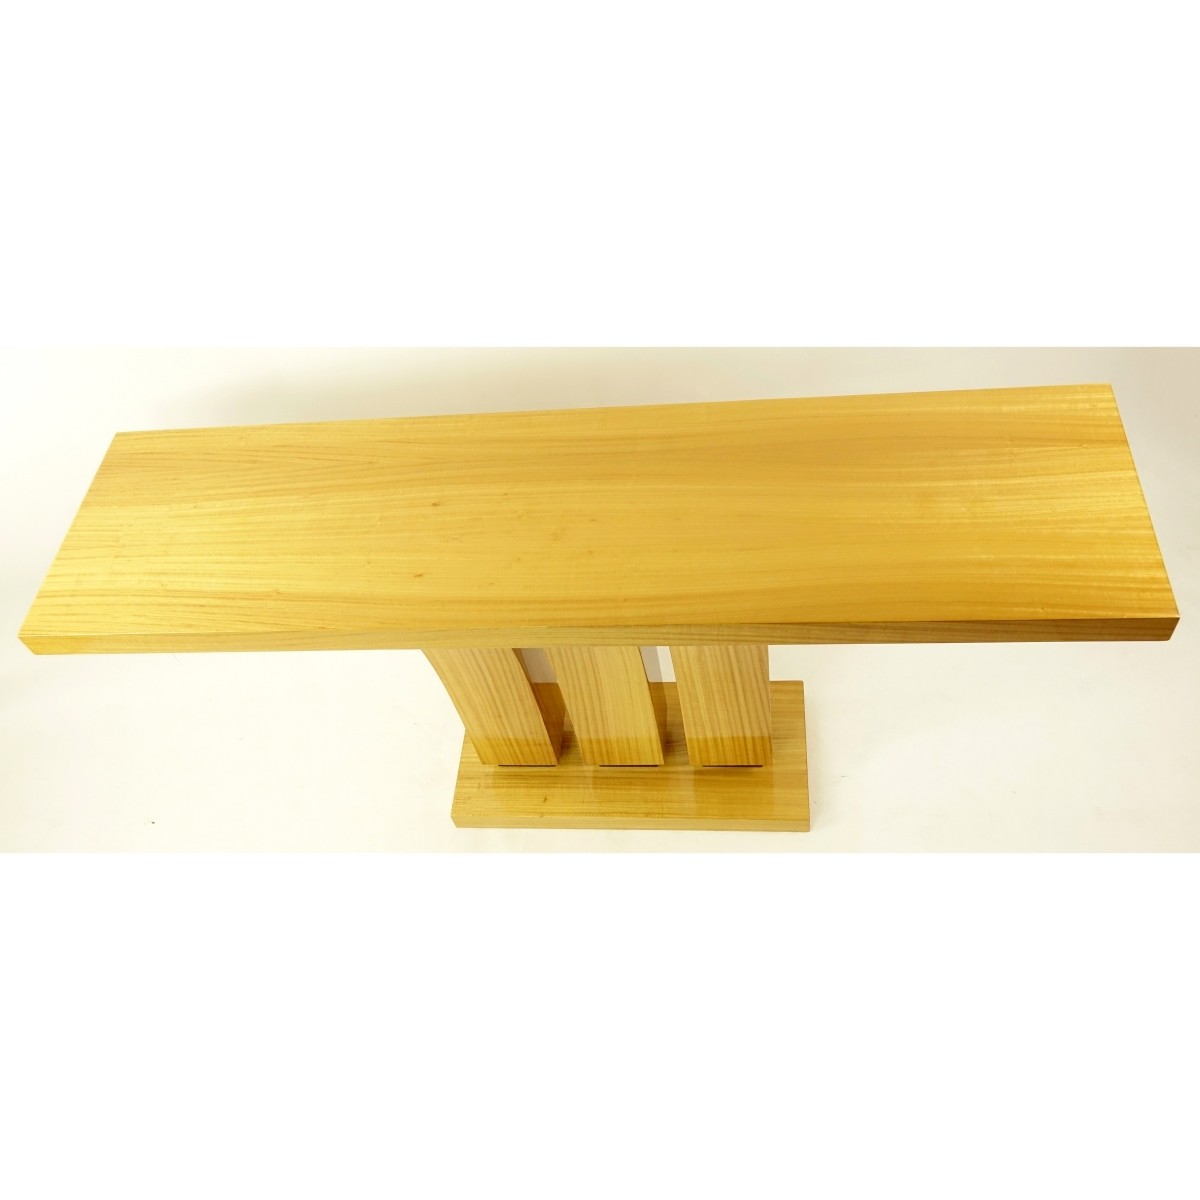 Art Deco Style Satinwood Console Table - Image 5 of 5